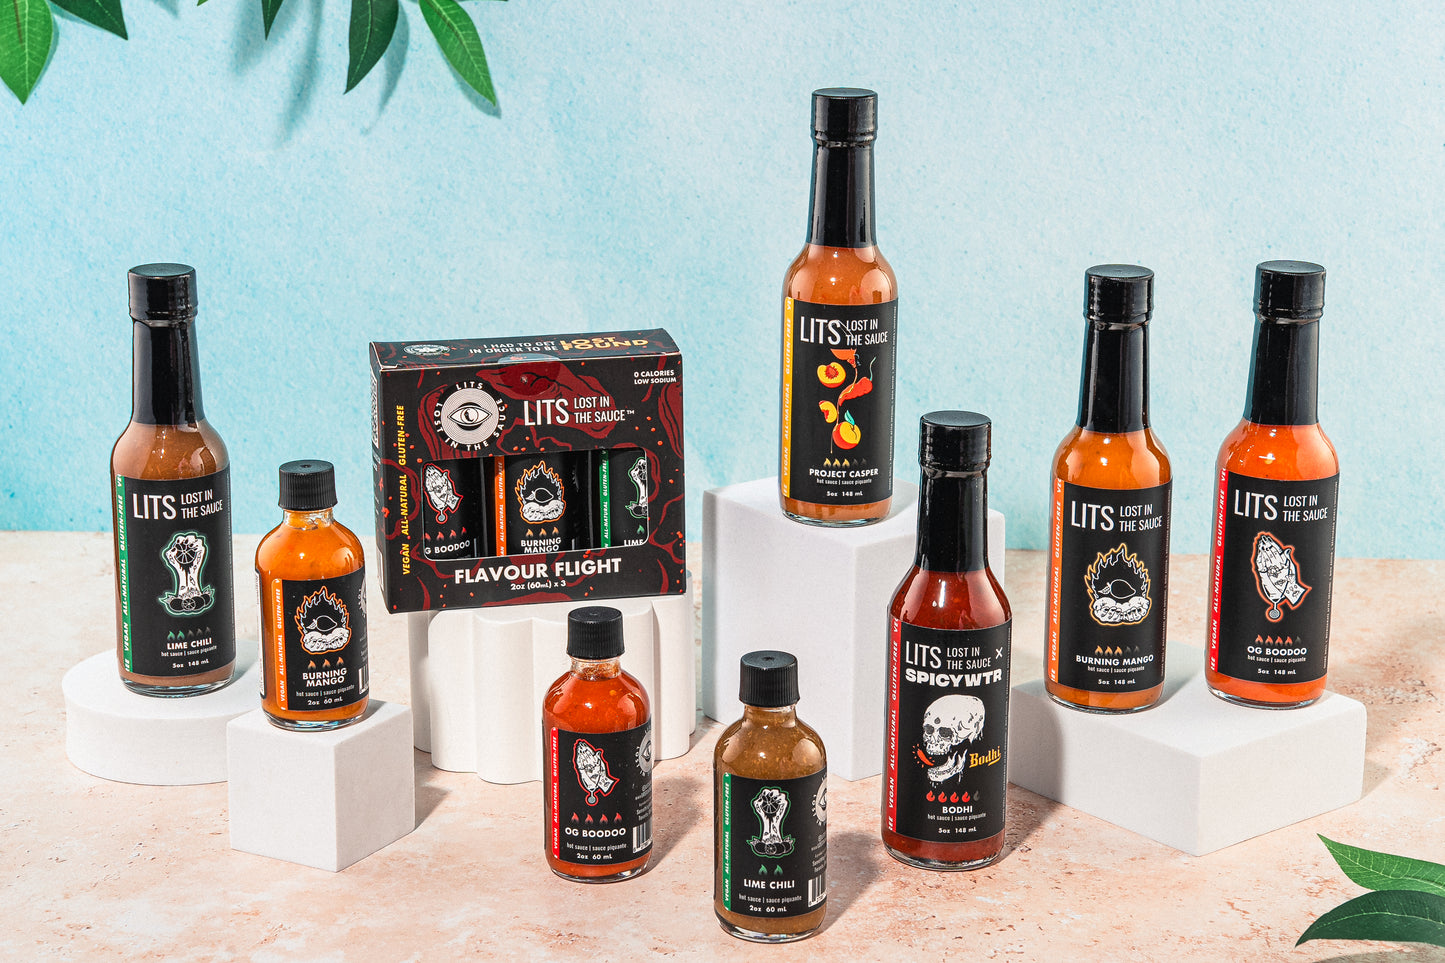 Lost in the Sauce - Gourmet all-natural vegan gluten-free hot sauce made in Toronto Ontario Canada